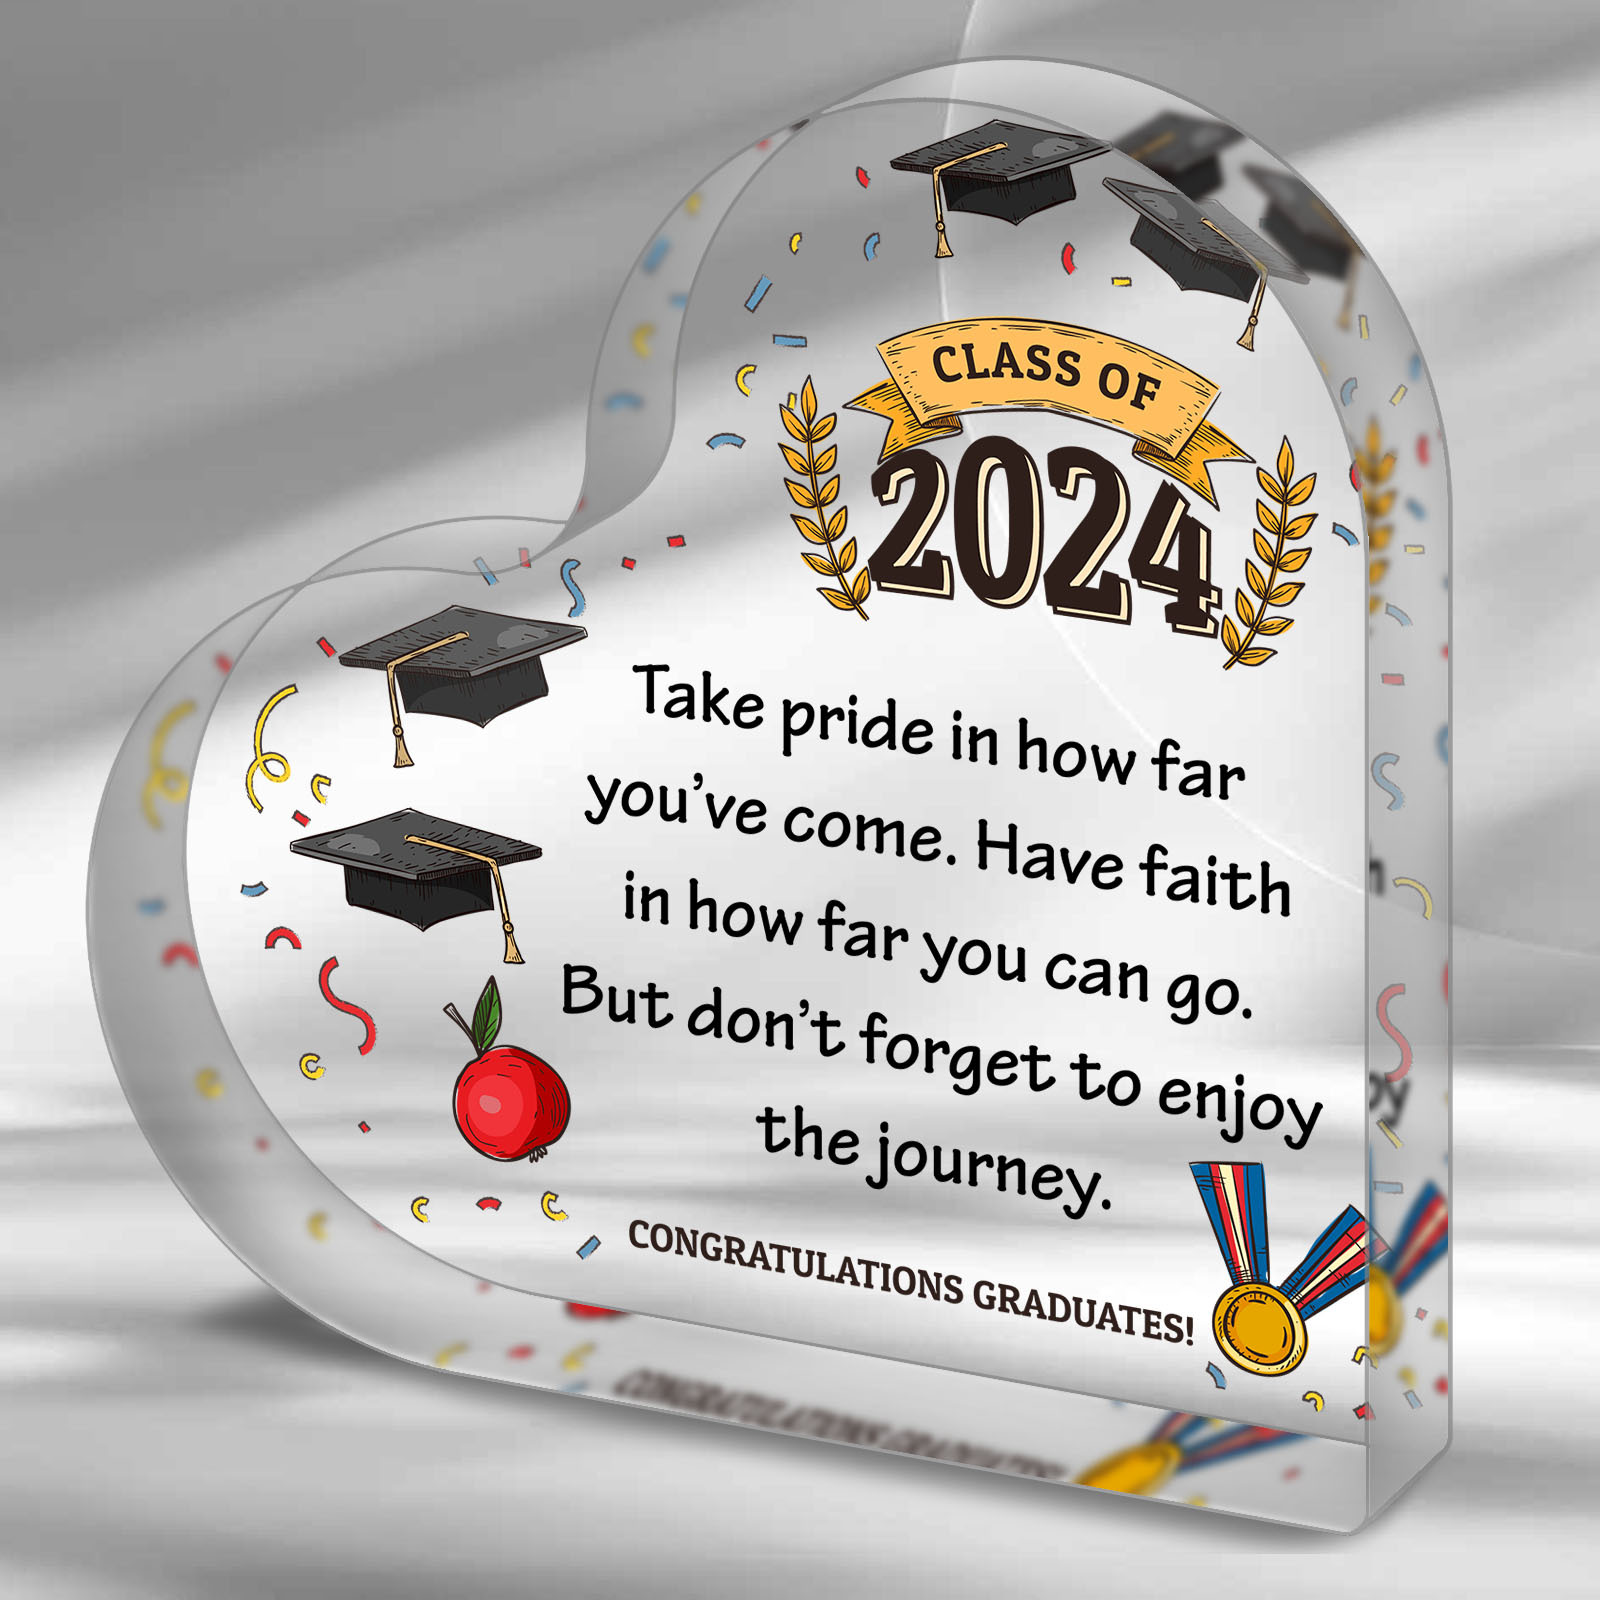 

1pc 2024 Graduation Inspirational Acrylic Gifts For Women Gifts Class Of 2024 Graduation Gifts University College Middle High School Graduate Souvenir For Students Brave Acrylic Gifts (elegant)